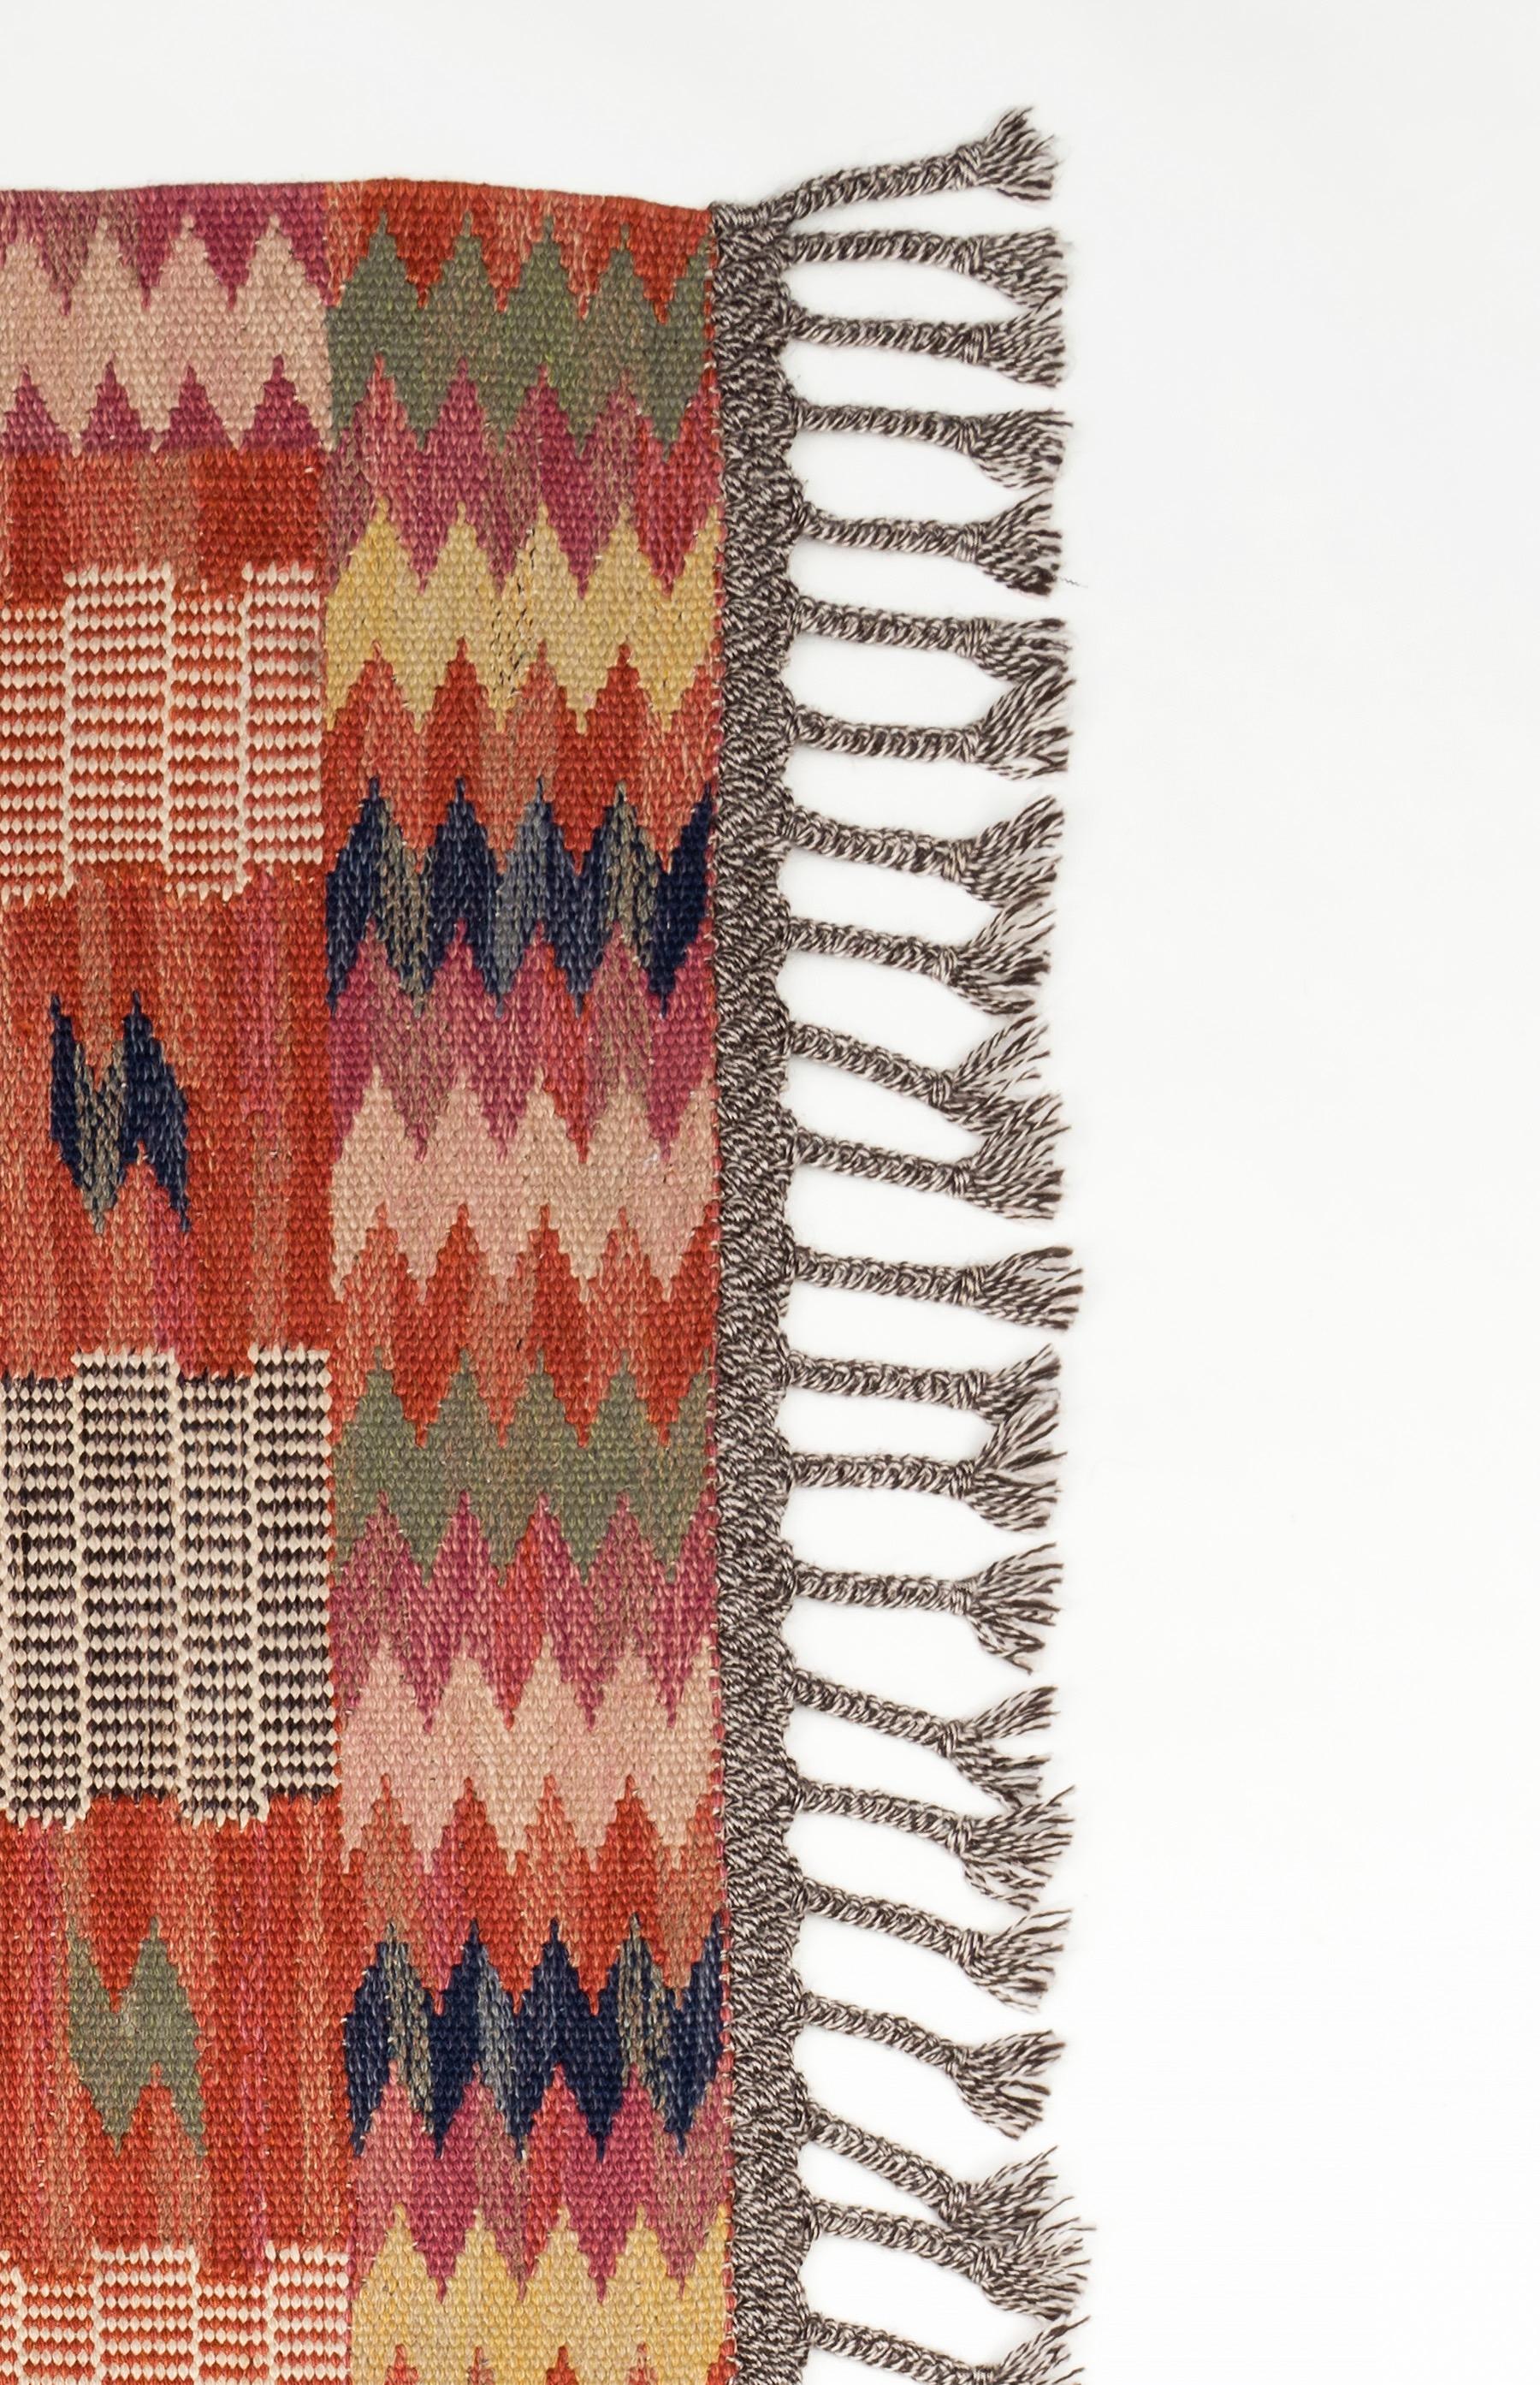 Vintage Swedish wool flat-weave rug, designed by Marta Maas-Fjetterström (1873-1941). 
Made in 1937. Signed MMF which is proof Marta made this rug during her lifetime.
After her death in 1941, rugs were signed AB MMF.
Excellent condition.